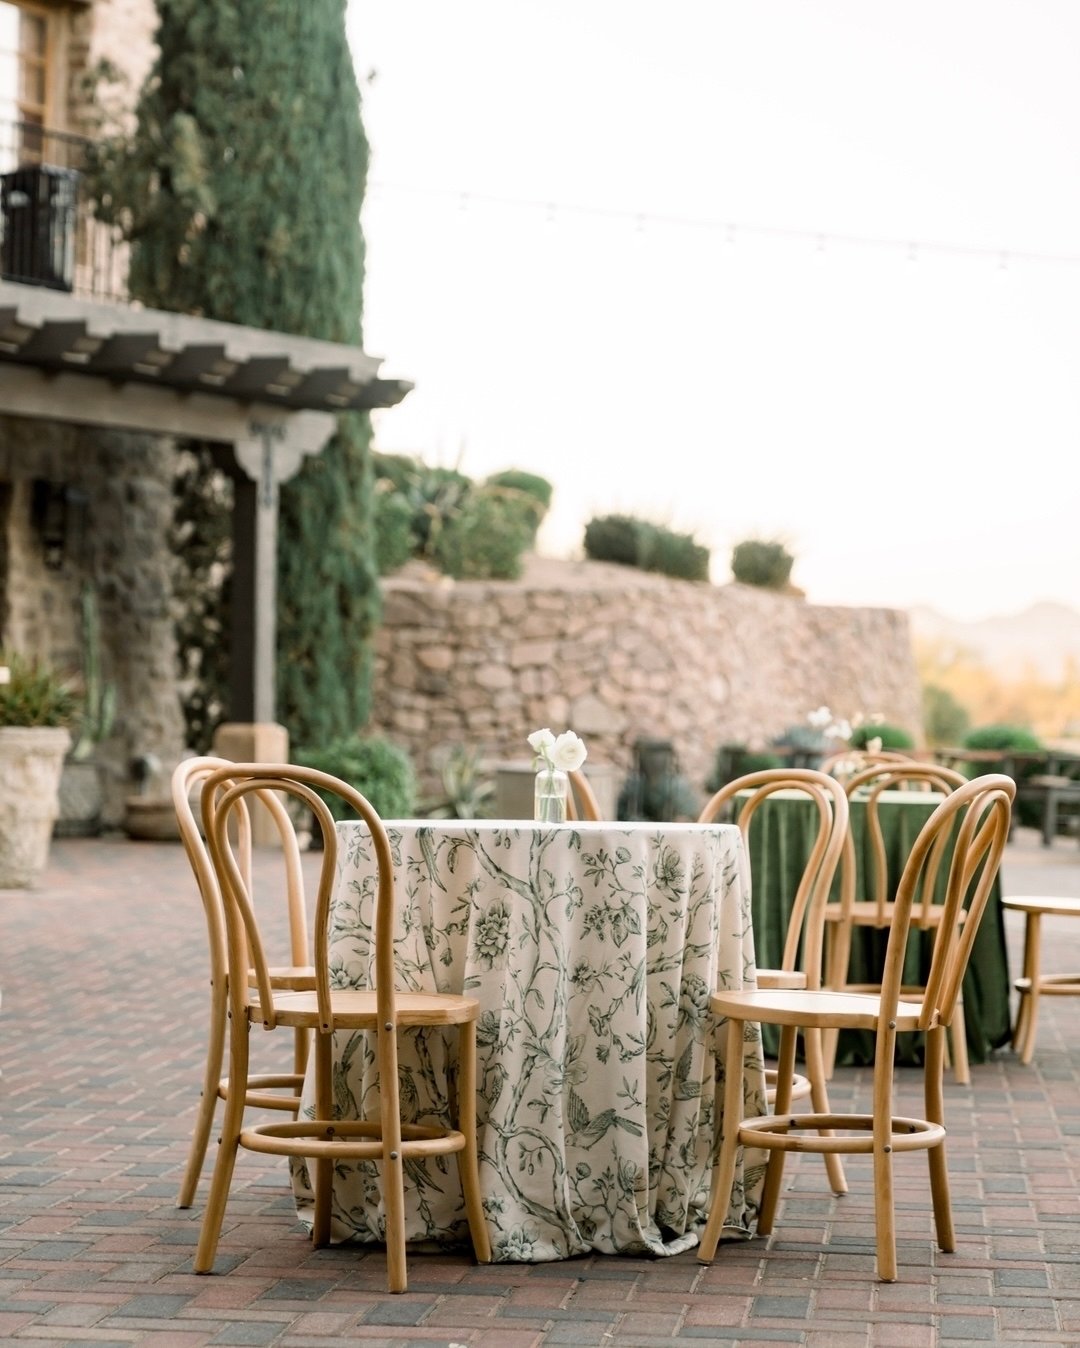 Perfectly paired cocktail hour seating with our Cora Dining Chairs🤍🌿
&bull;
Planner: @shineeventsaz
Venue: @superstitionmtnweddings
Photographer: @megancaryphotography
Videography: @kylehustis
Floral Design: @floralsbykendra
Linen: @nuagedesignco
&